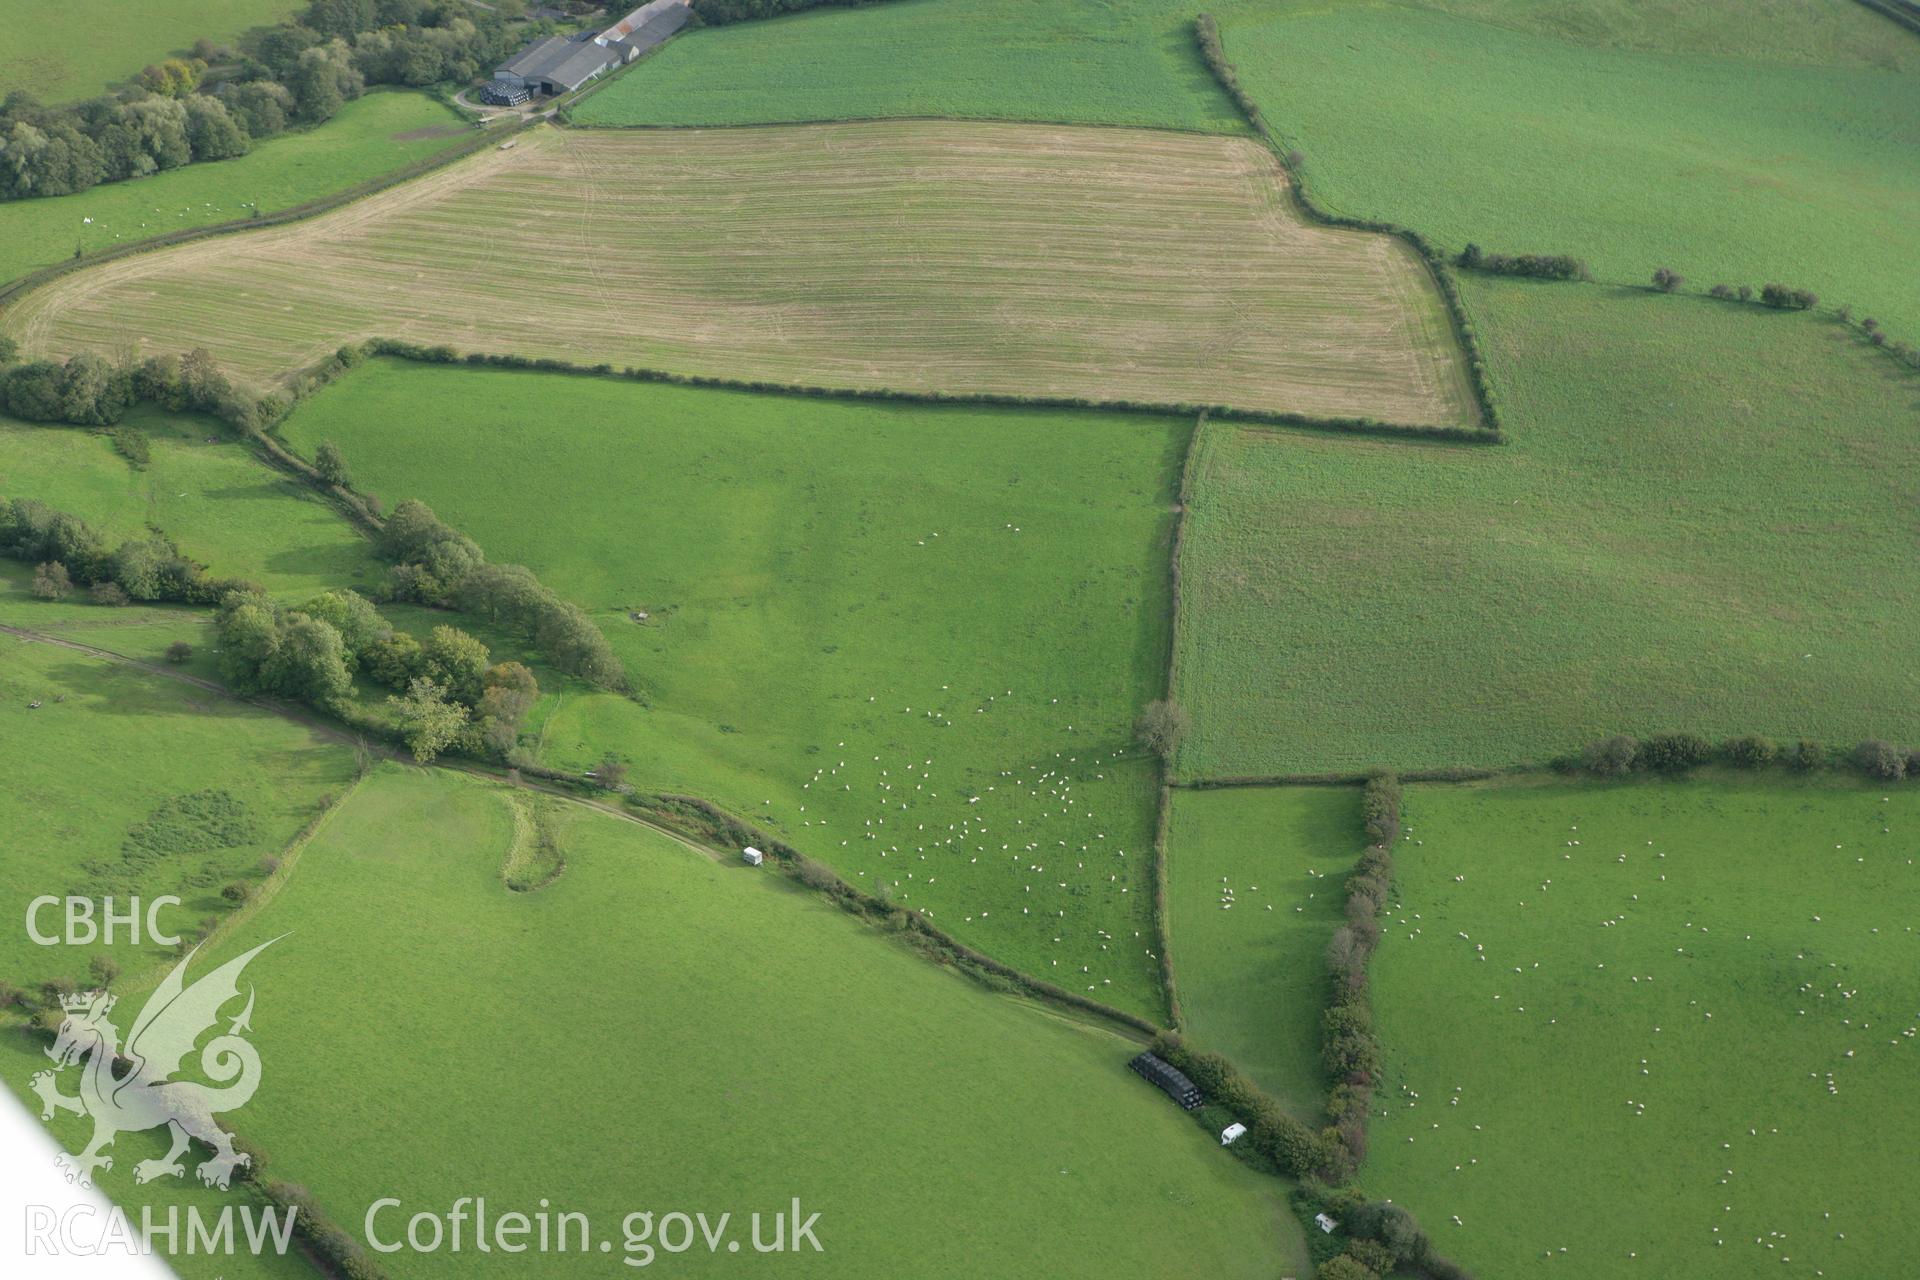 RCAHMW colour oblique photograph of Offa's Dyke England. Taken by Toby Driver on 10/10/2008.